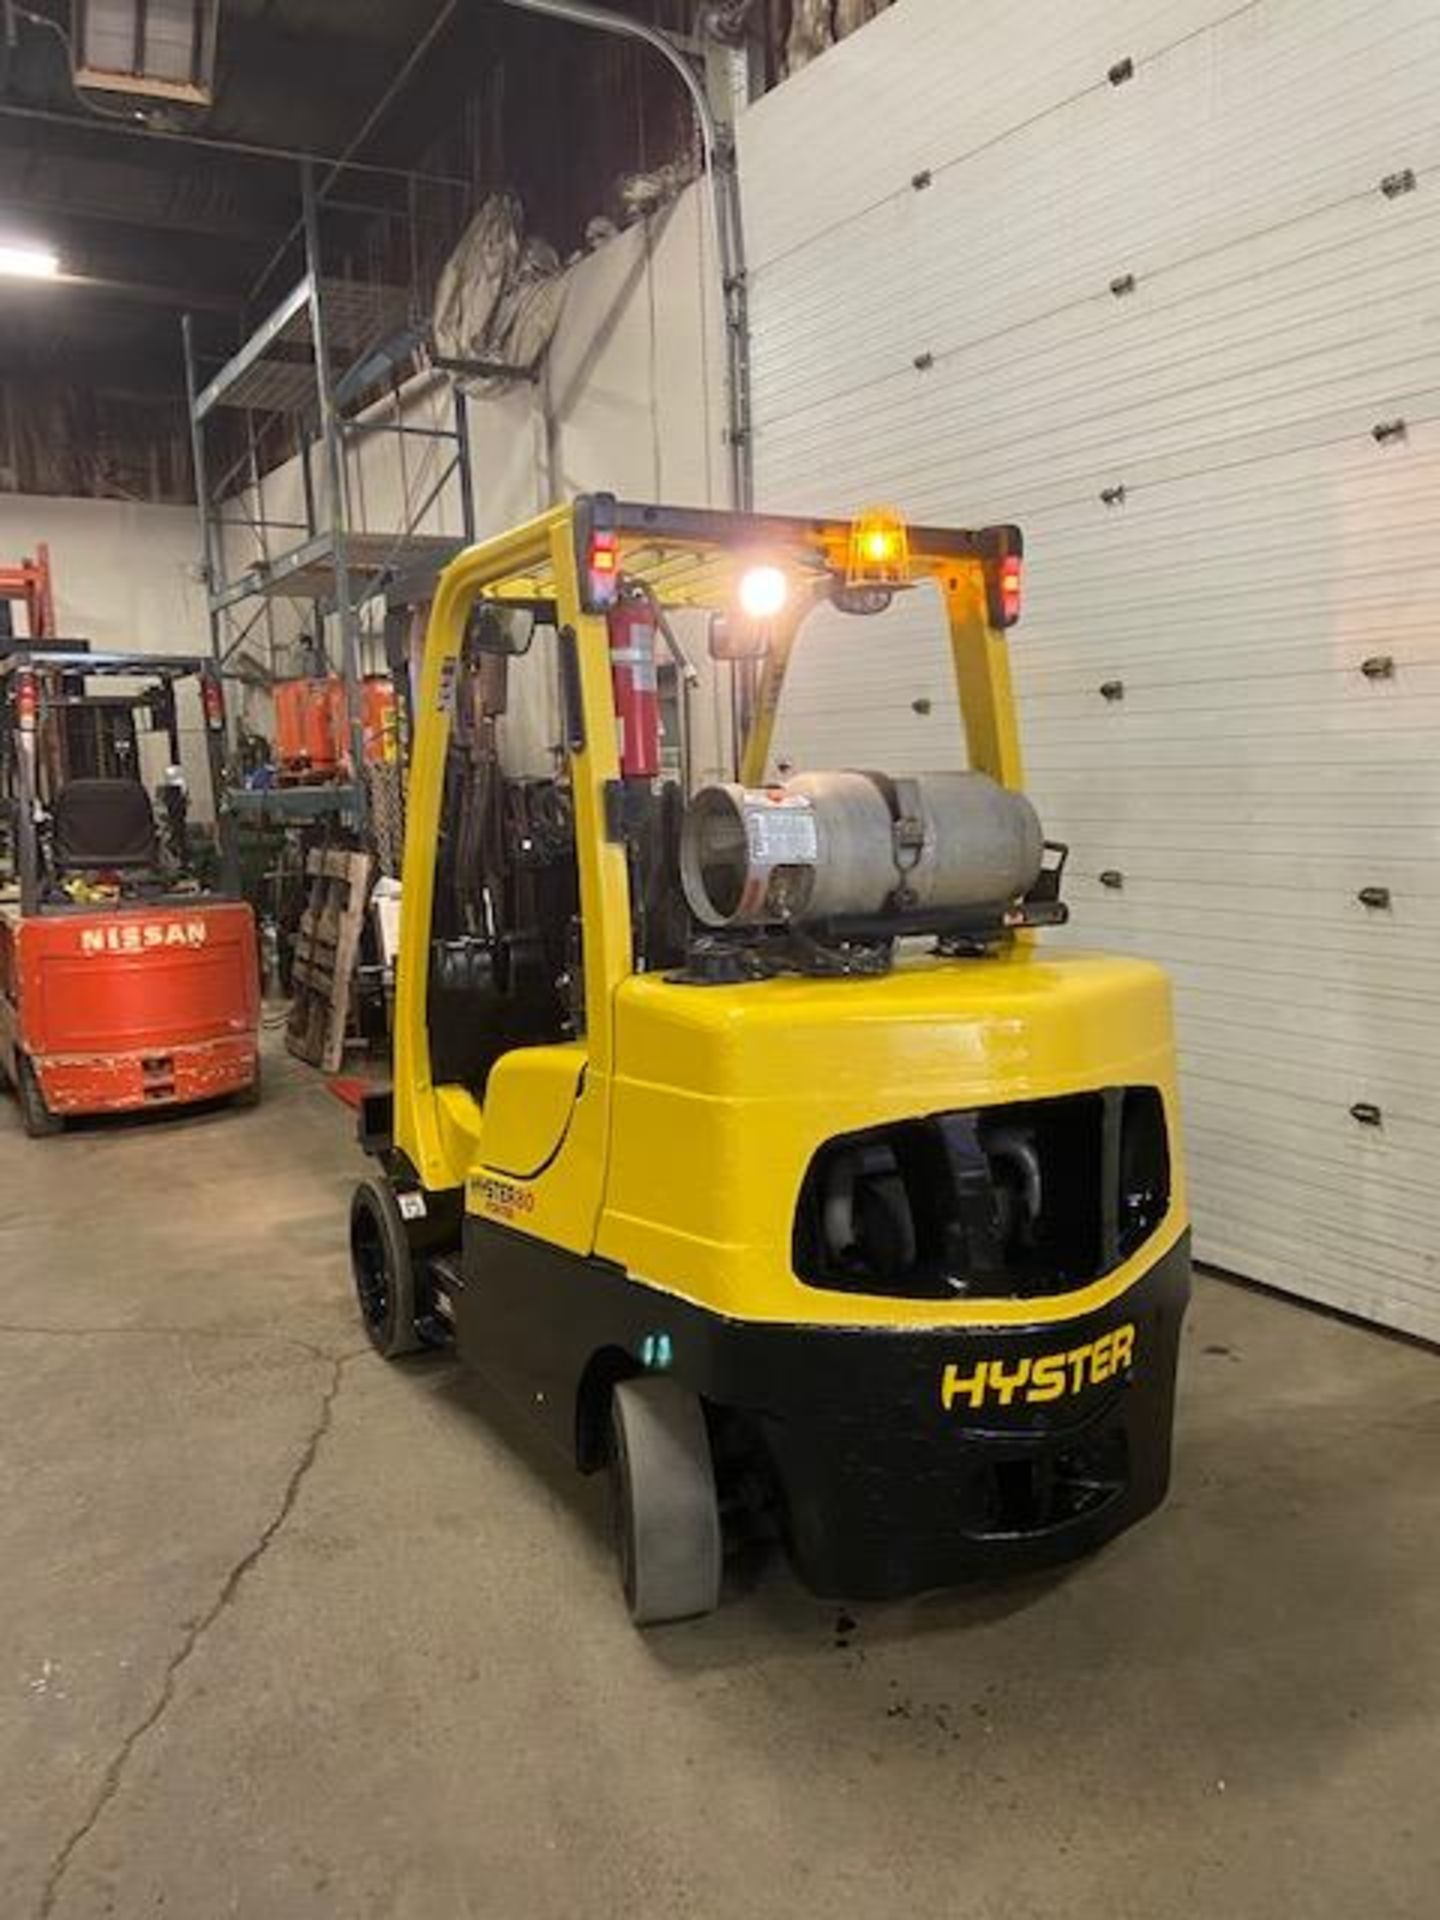 FREE CUSTOMS - 2014 Hyster 8000lbs Capacity Forklift LPG (Propane) with sideshift and 3 stage mast - Image 3 of 3